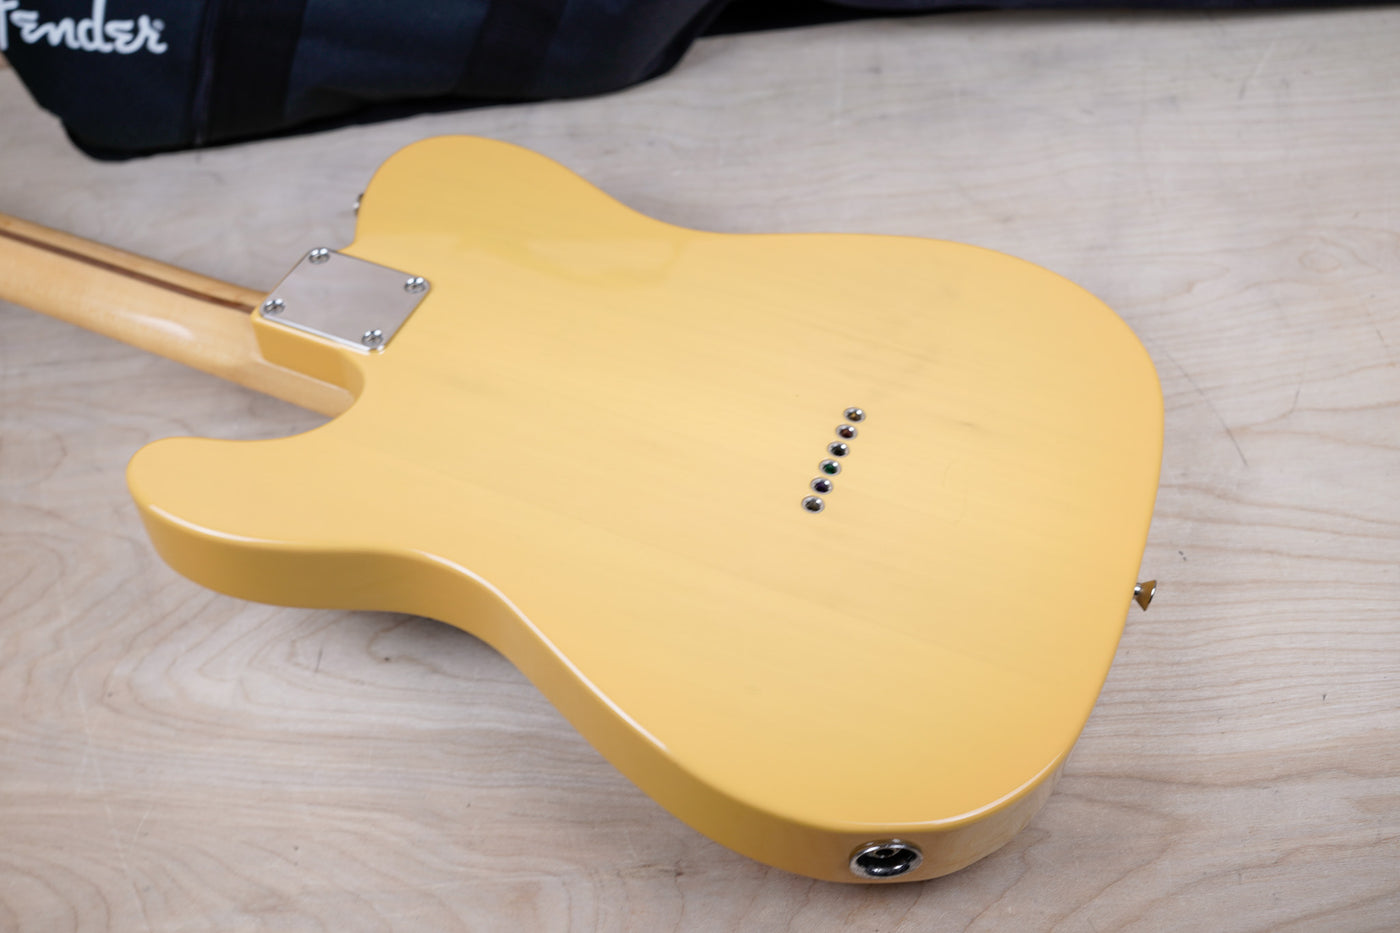 Fender Traditional 50s Telecaster MIJ 2021 Butterscotch Blonde Made in Japan w/ Bag, Tags